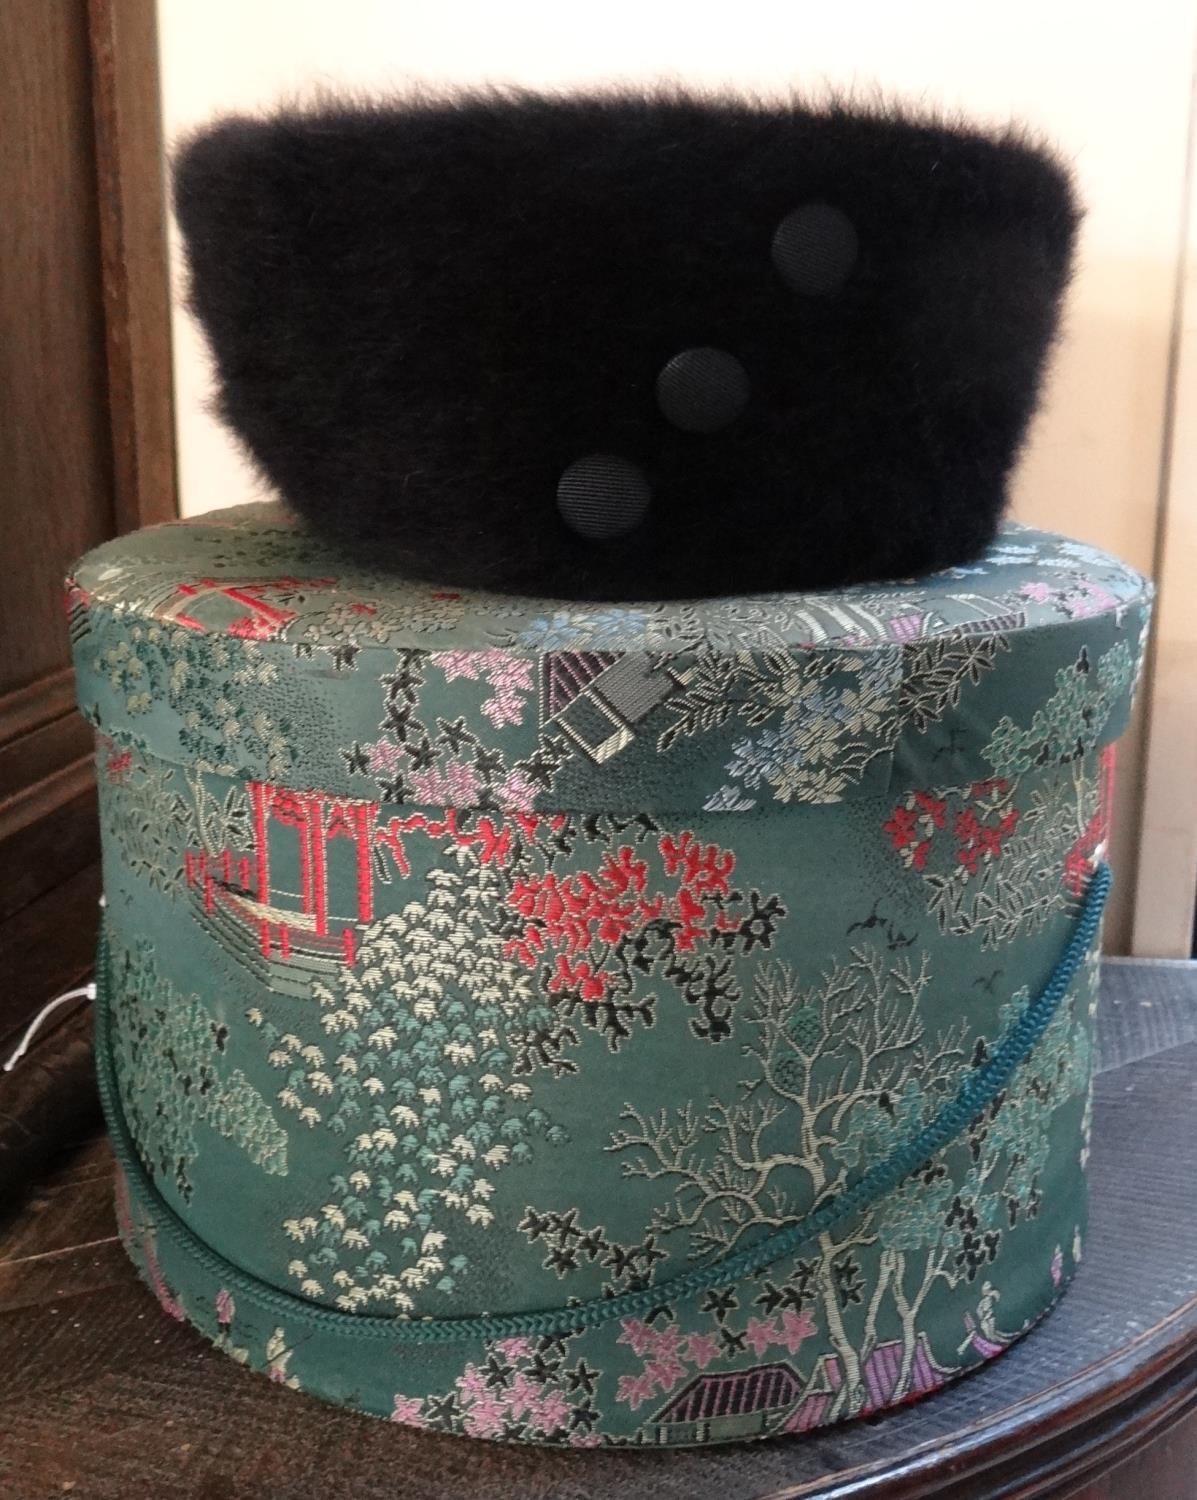 Vintage Chinese silk hatbox containing a Kangol black pillbox hat with button detail. (B.P. 21% +